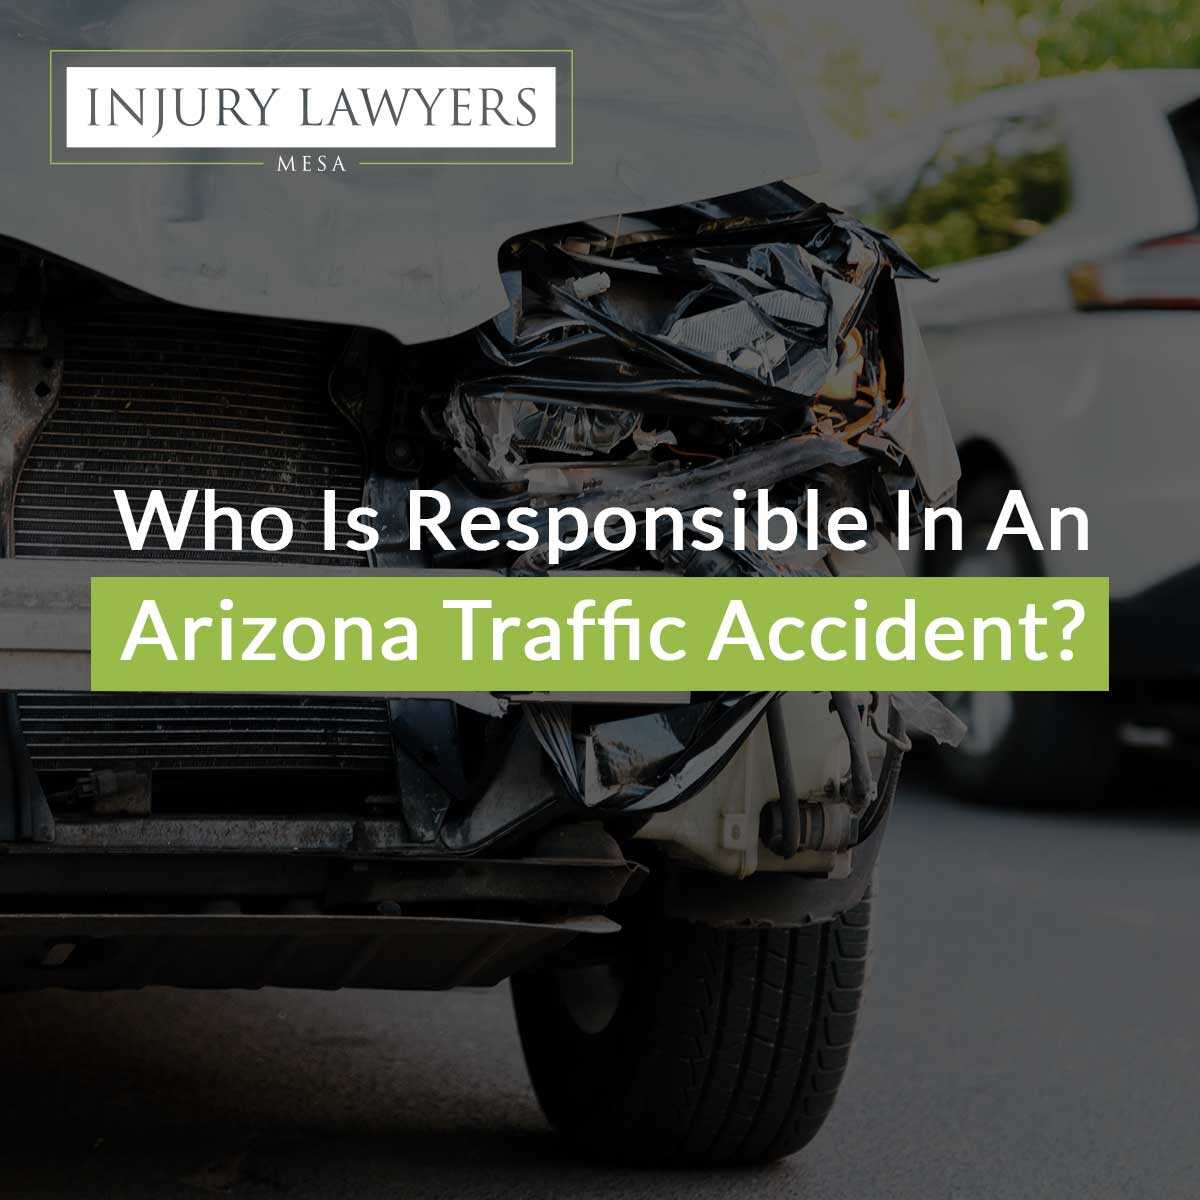 Who Is Responsible In An Arizona Traffic Accident?